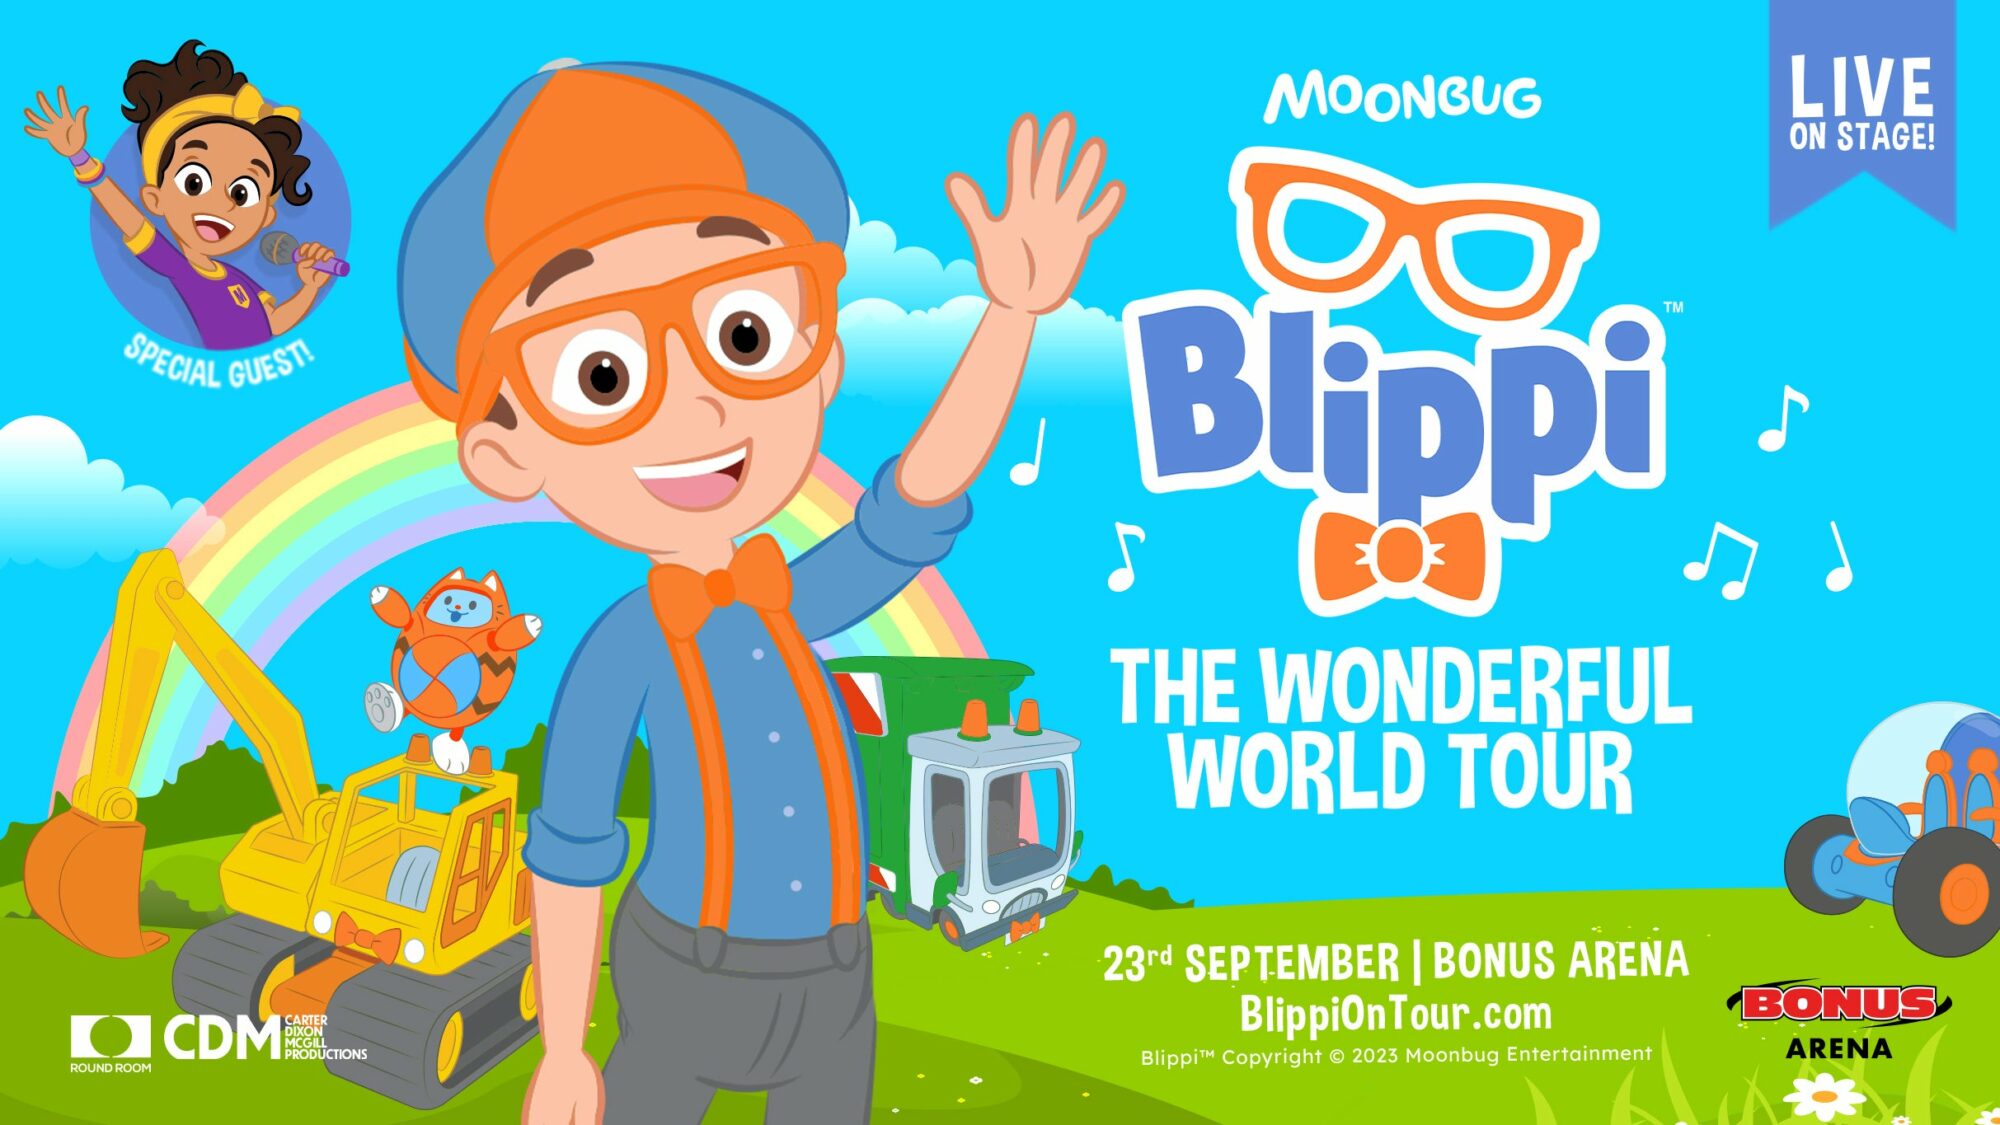 Image name Blippi The Wonderful World Tour at Bonus Arena Hull Hull the 4 image from the post Blippi - The Wonderful World Tour at Connexin Live, Hull in Yorkshire.com.